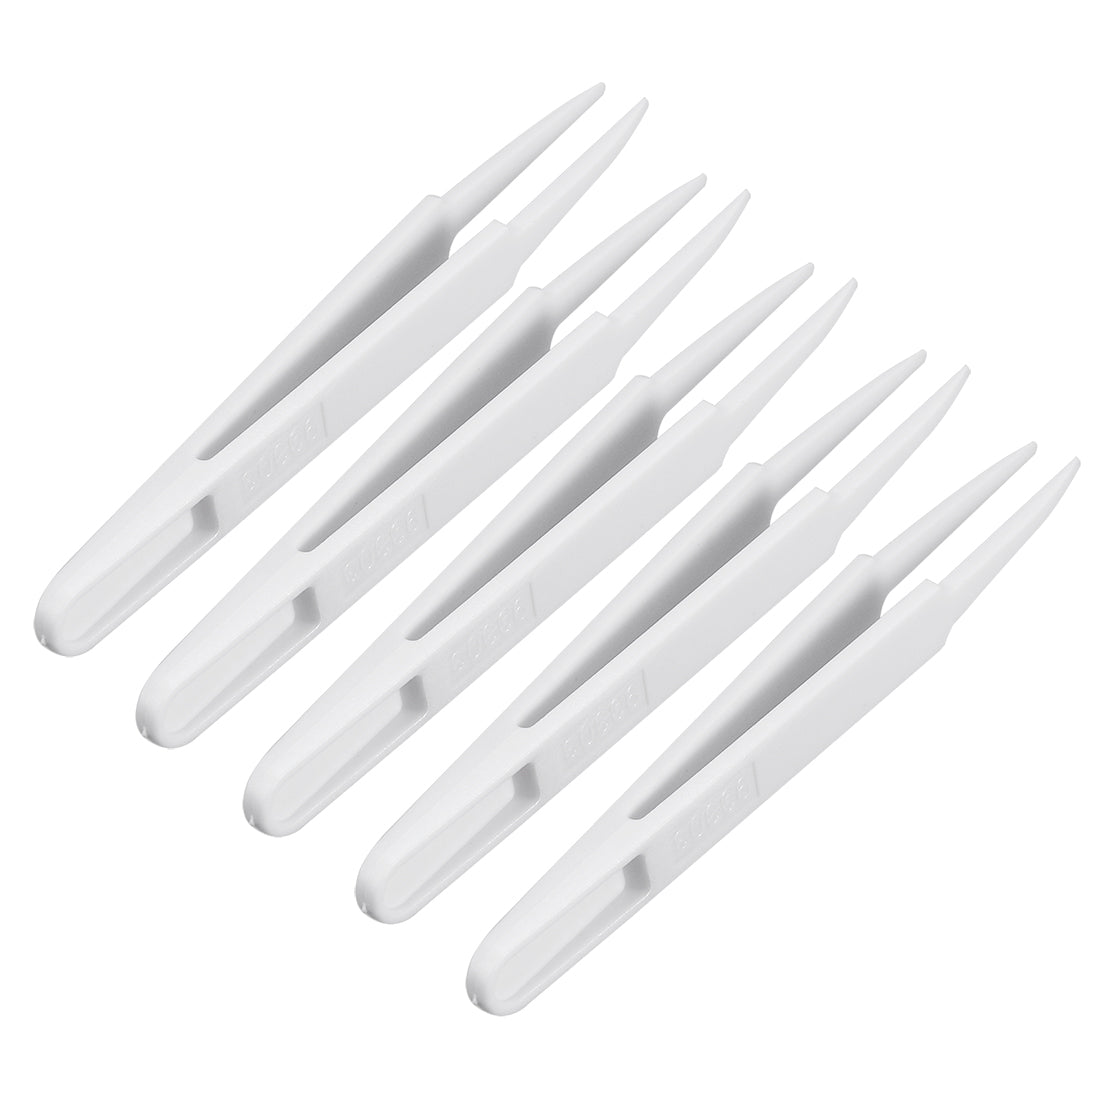 uxcell Uxcell 93303 Milky White Soft Plastic Fine Point Tip Anti-static Tweezers 4.7 Inch Length 5pcs